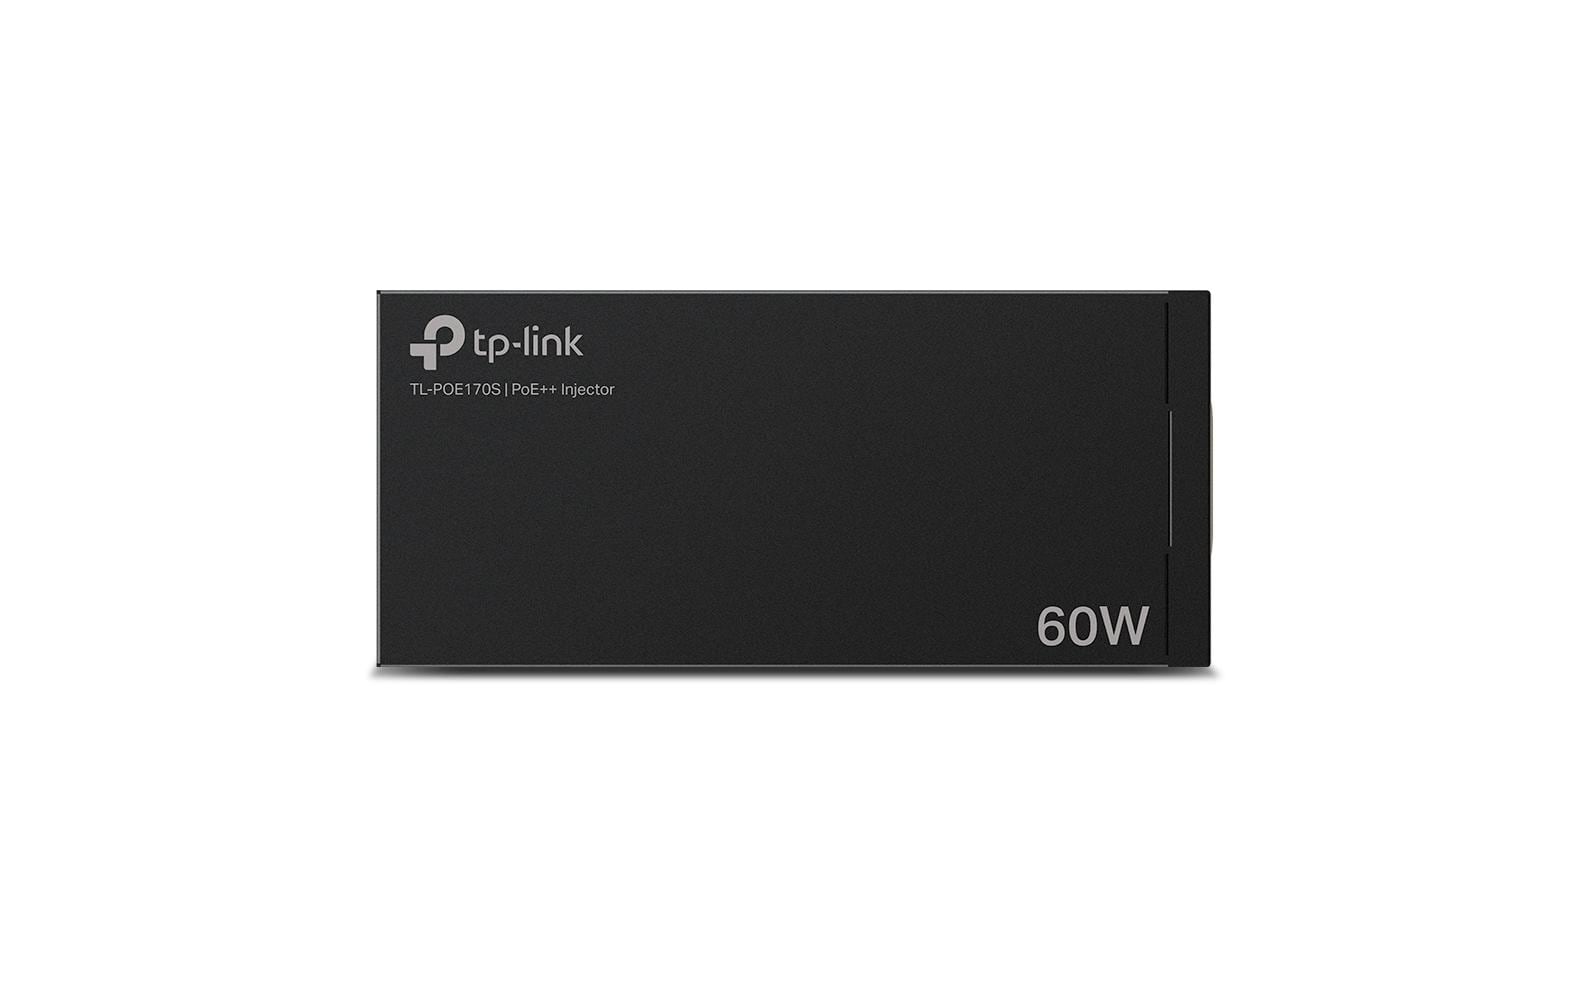 TP-Link PoE++ Injector TL-PoE170S